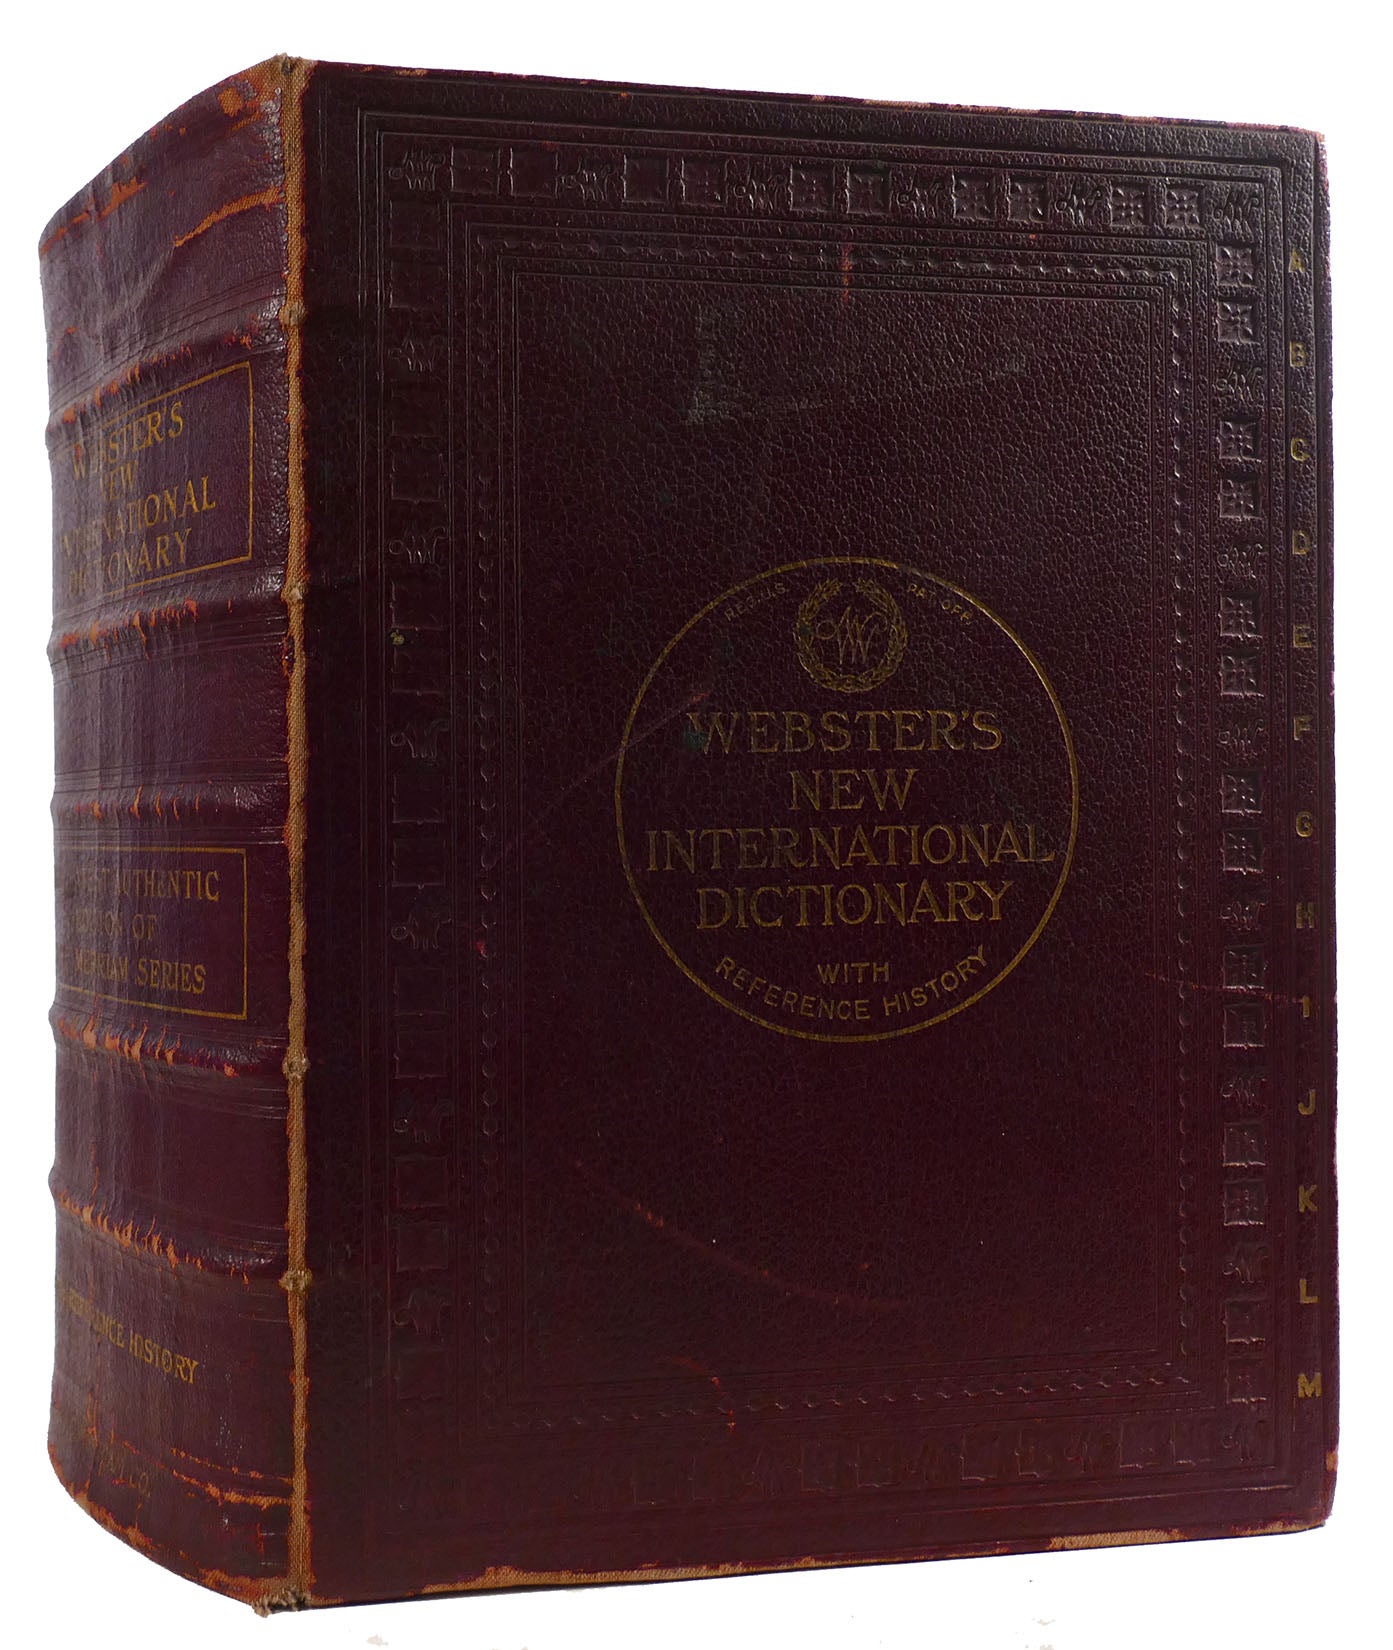 WEBSTER'S NEW INTERNATIONAL DICTIONARY OF THE ENGLISH LANGUAGE Based on the  International Dictionary of 1890 and 1900. Now Completely Revised in all 